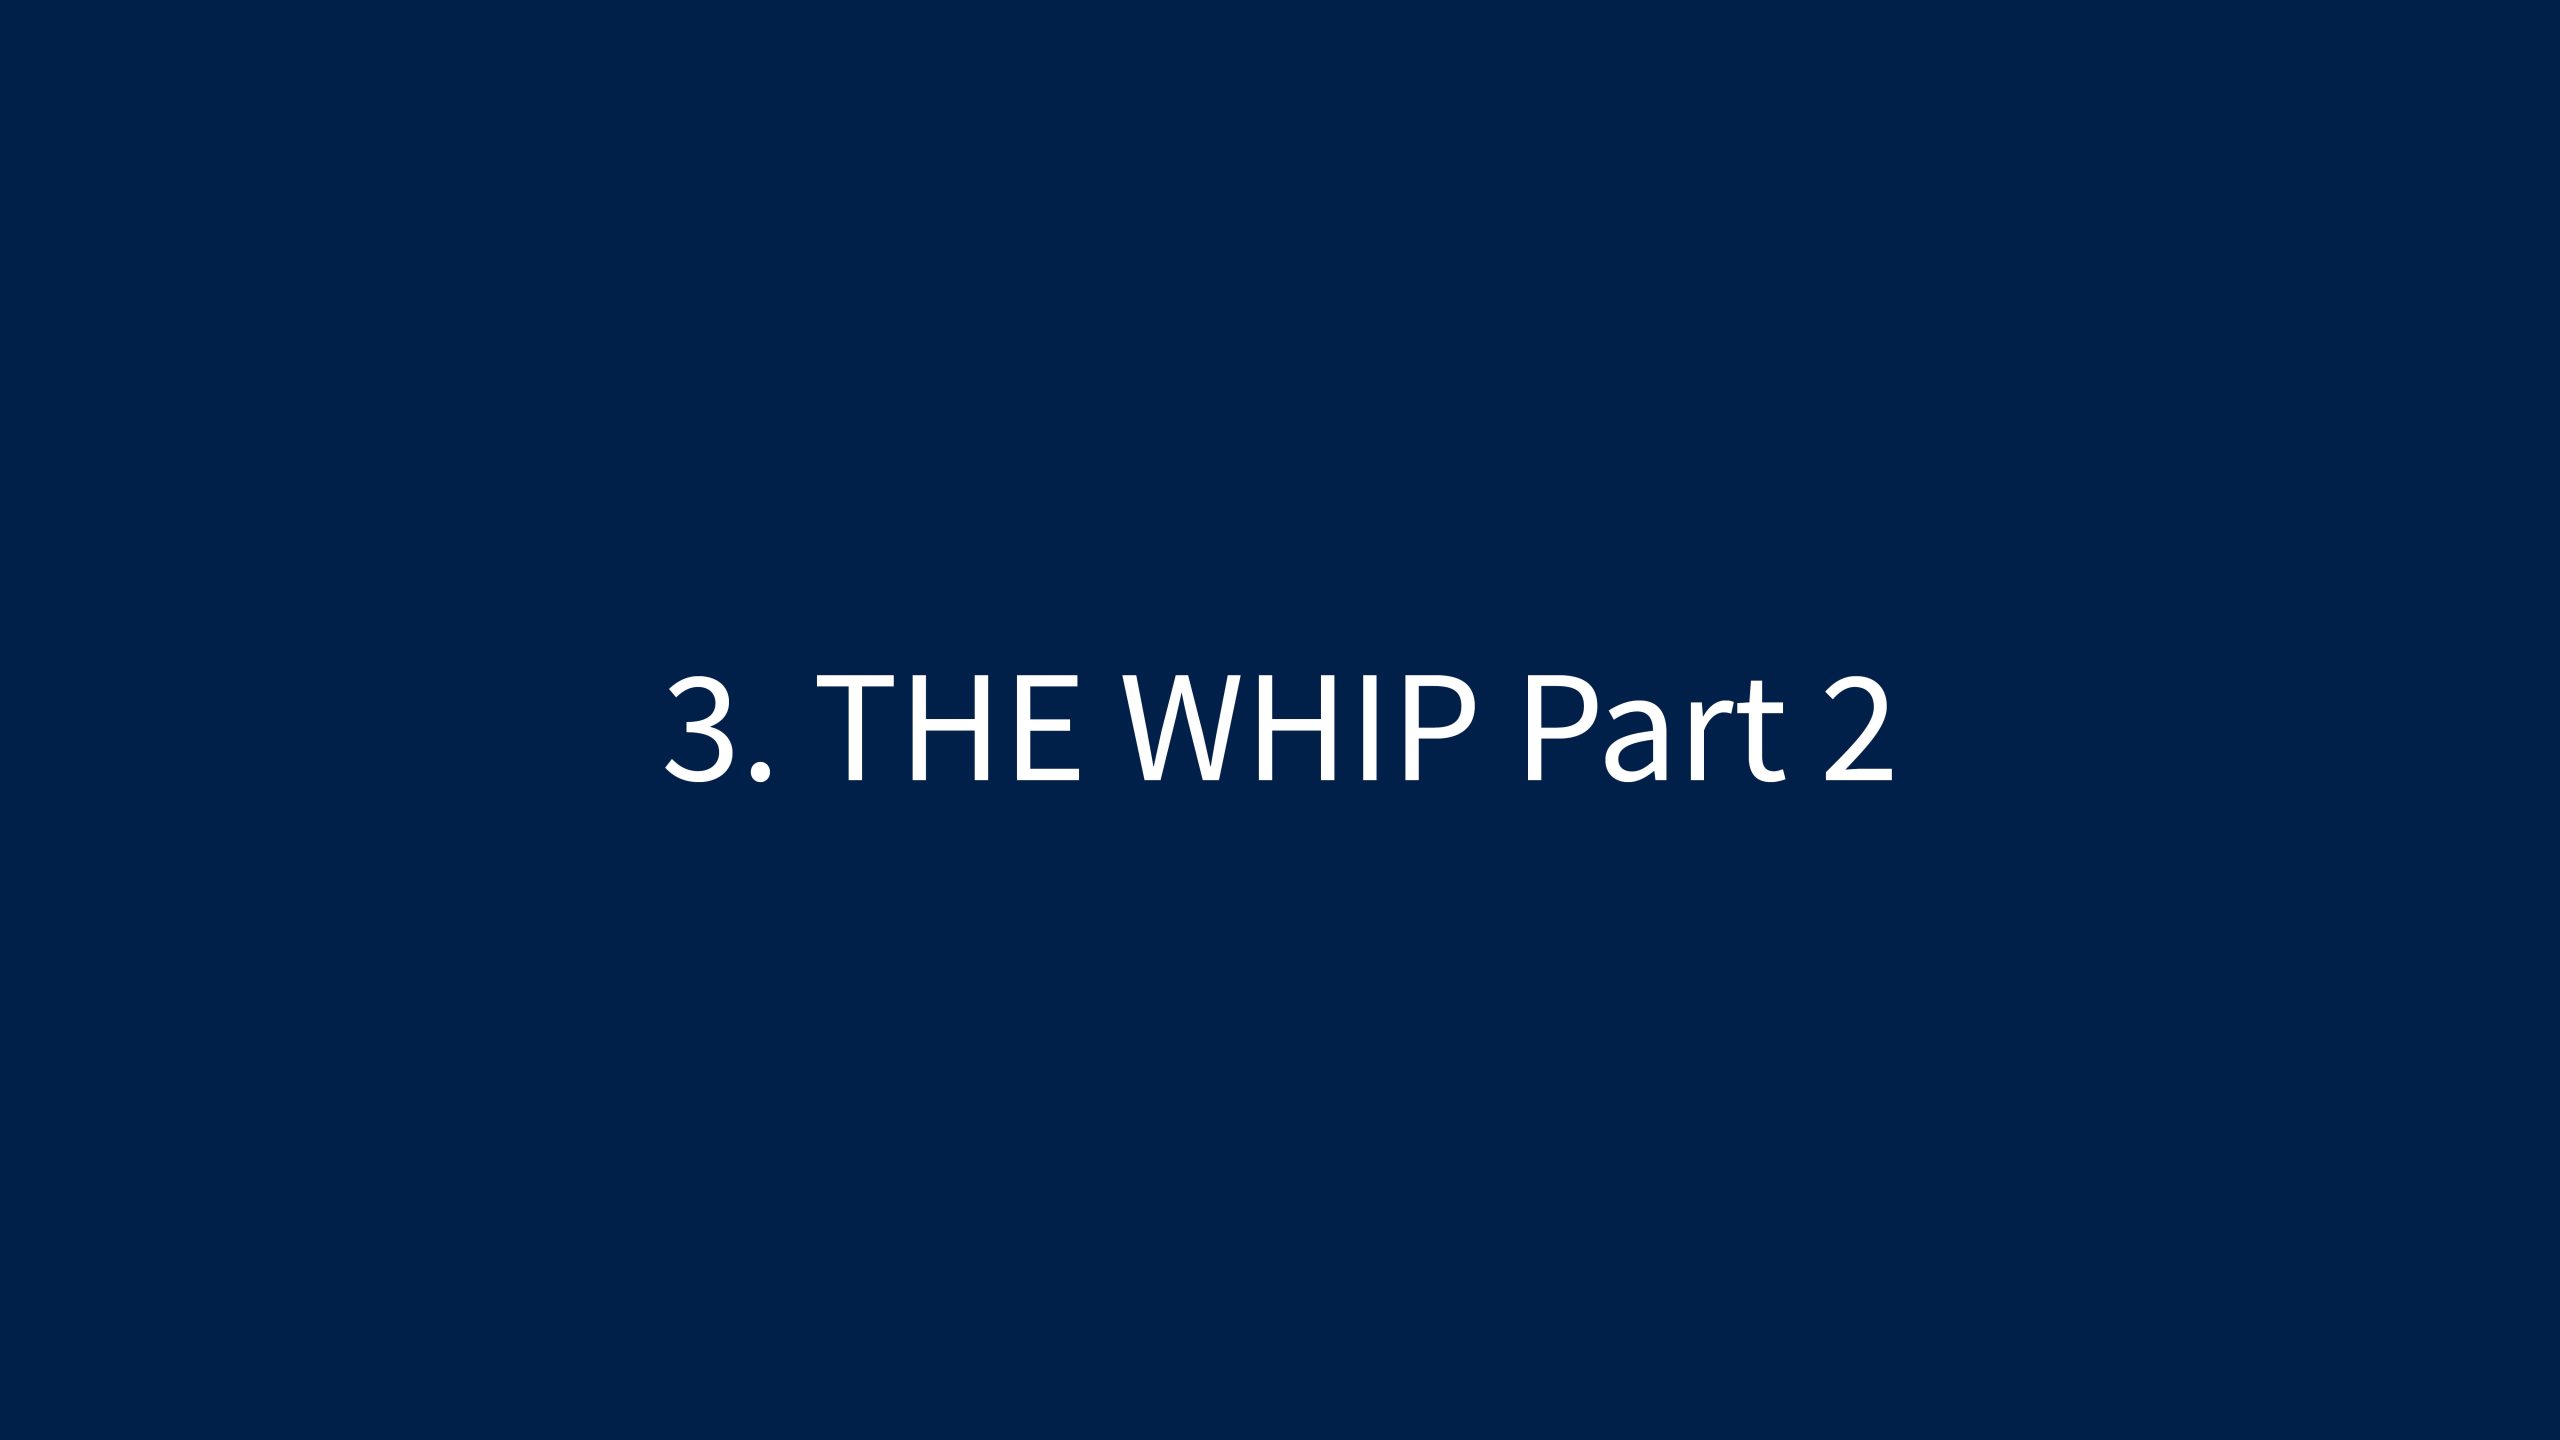 3 THE WHIP PART 2